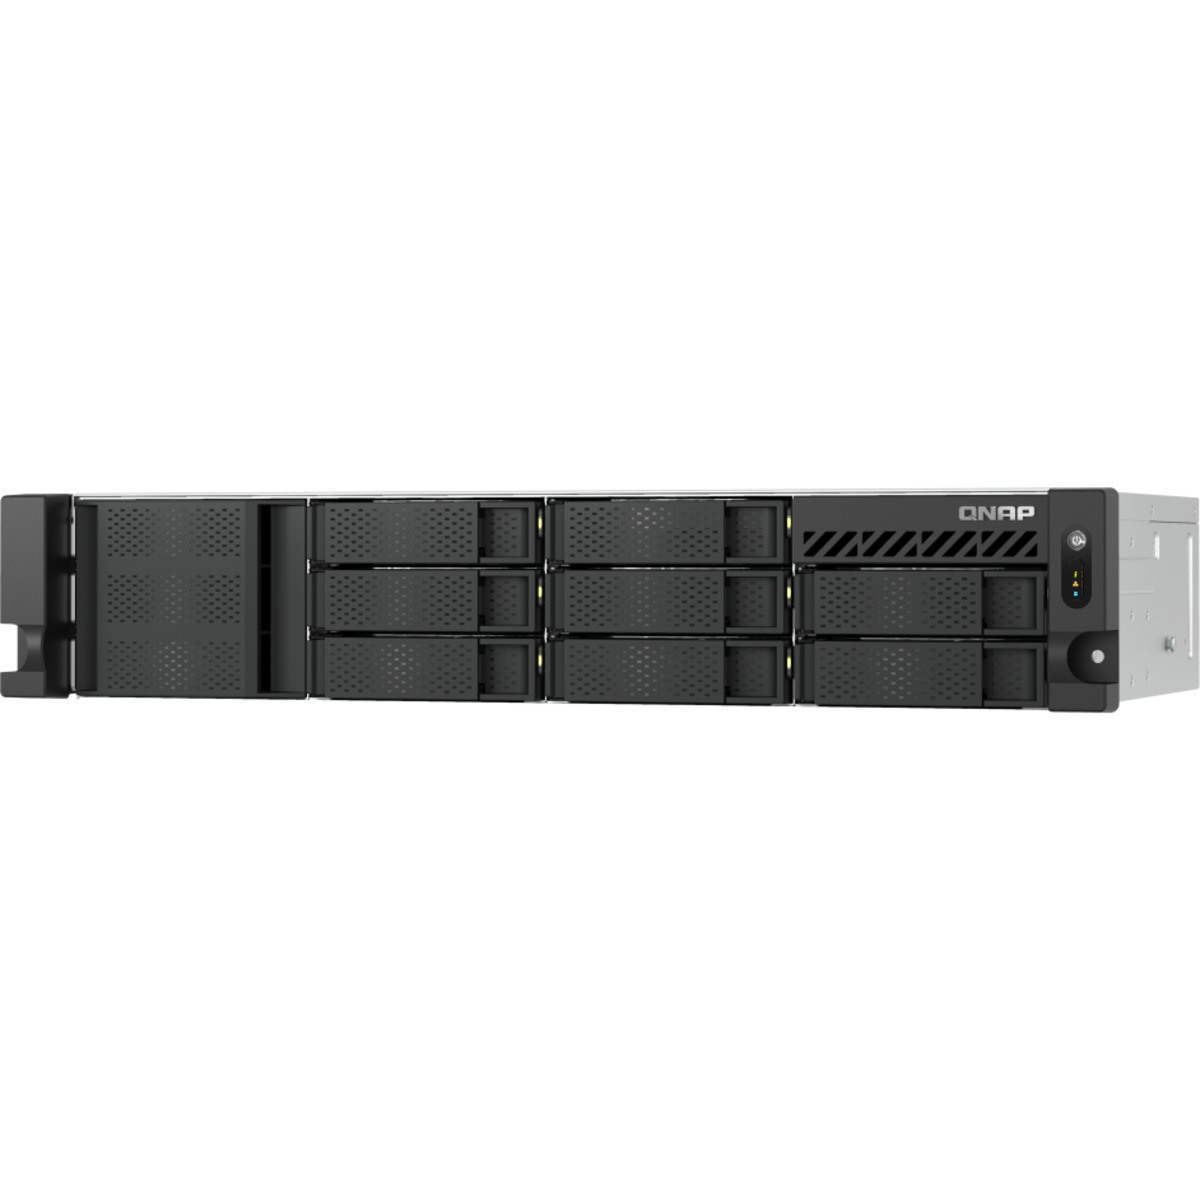 QNAP TS-855eU-RP 7tb 8-Bay RackMount Multimedia / Power User / Business NAS - Network Attached Storage Device 7x1tb Samsung 870 EVO MZ-77E1T0BAM 2.5 560/530MB/s SATA 6Gb/s SSD CONSUMER Class Drives Installed - Burn-In Tested - FREE RAM UPGRADE TS-855eU-RP